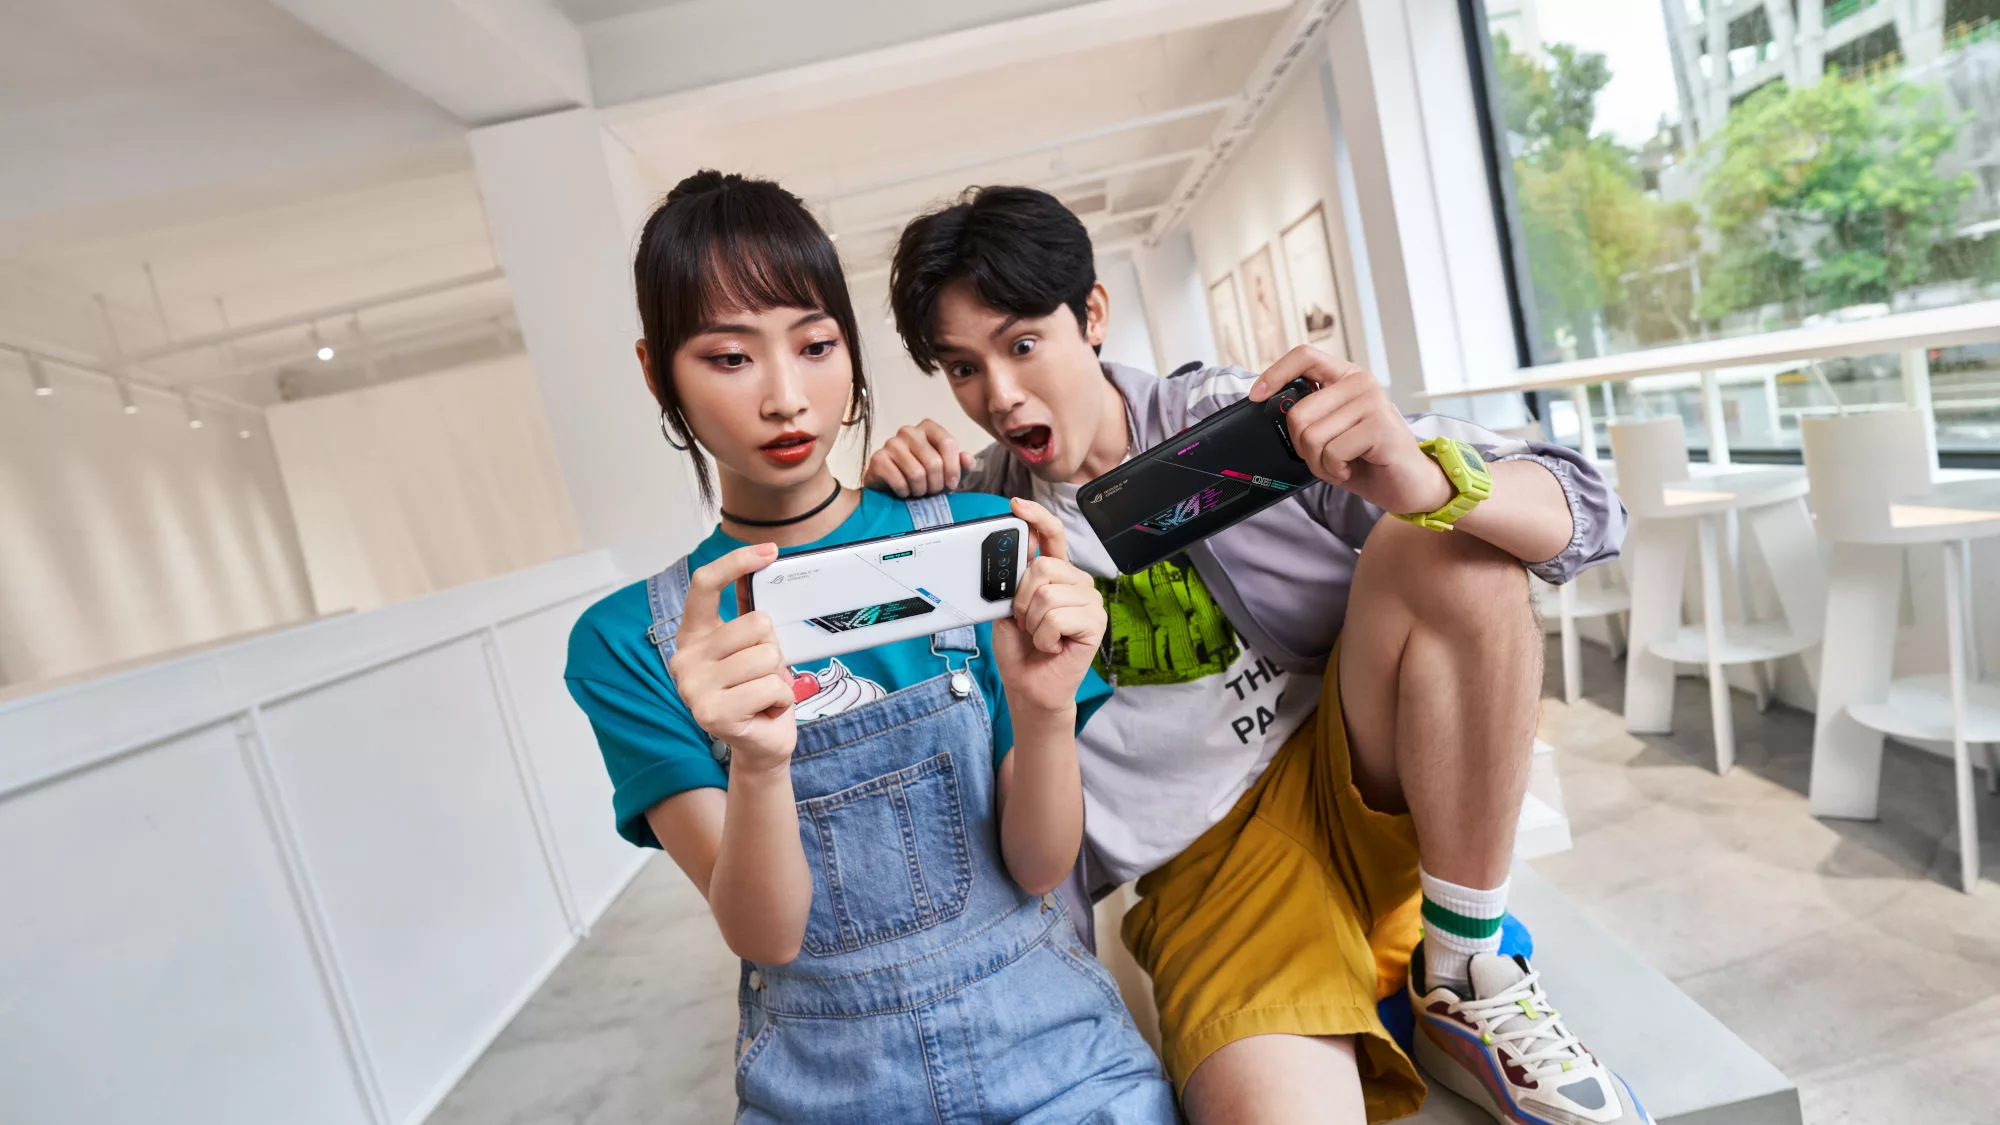 Two people holding ROG phones in landscape mode, with mouths open excitedly.